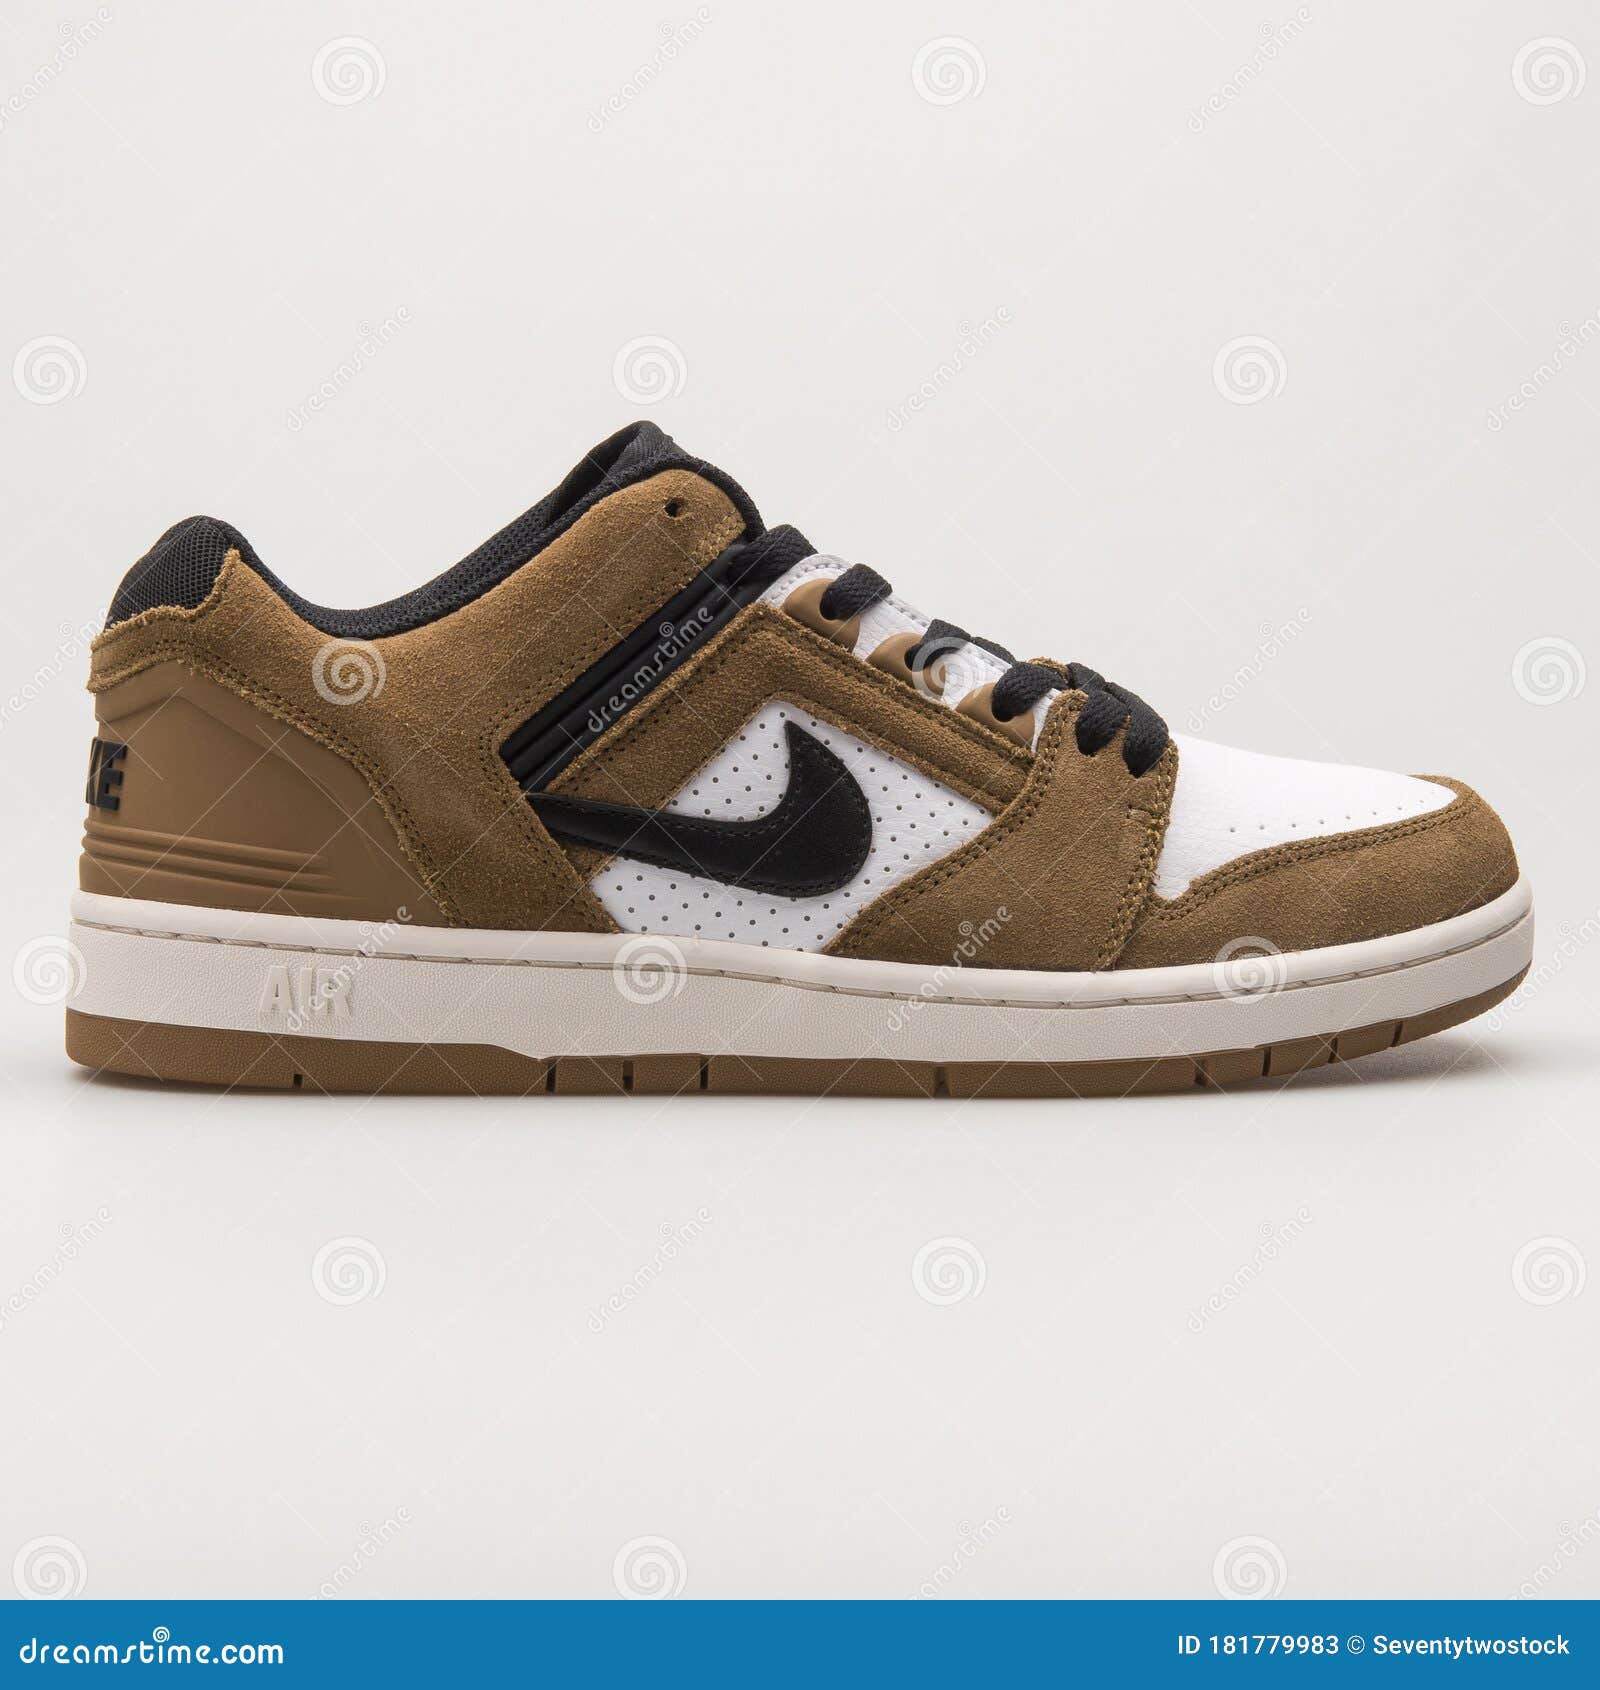 Nike SB Air Force 2 Low Brown, Black White Sneaker Editorial Stock Photo - Image of fitness, equipment: 181779983